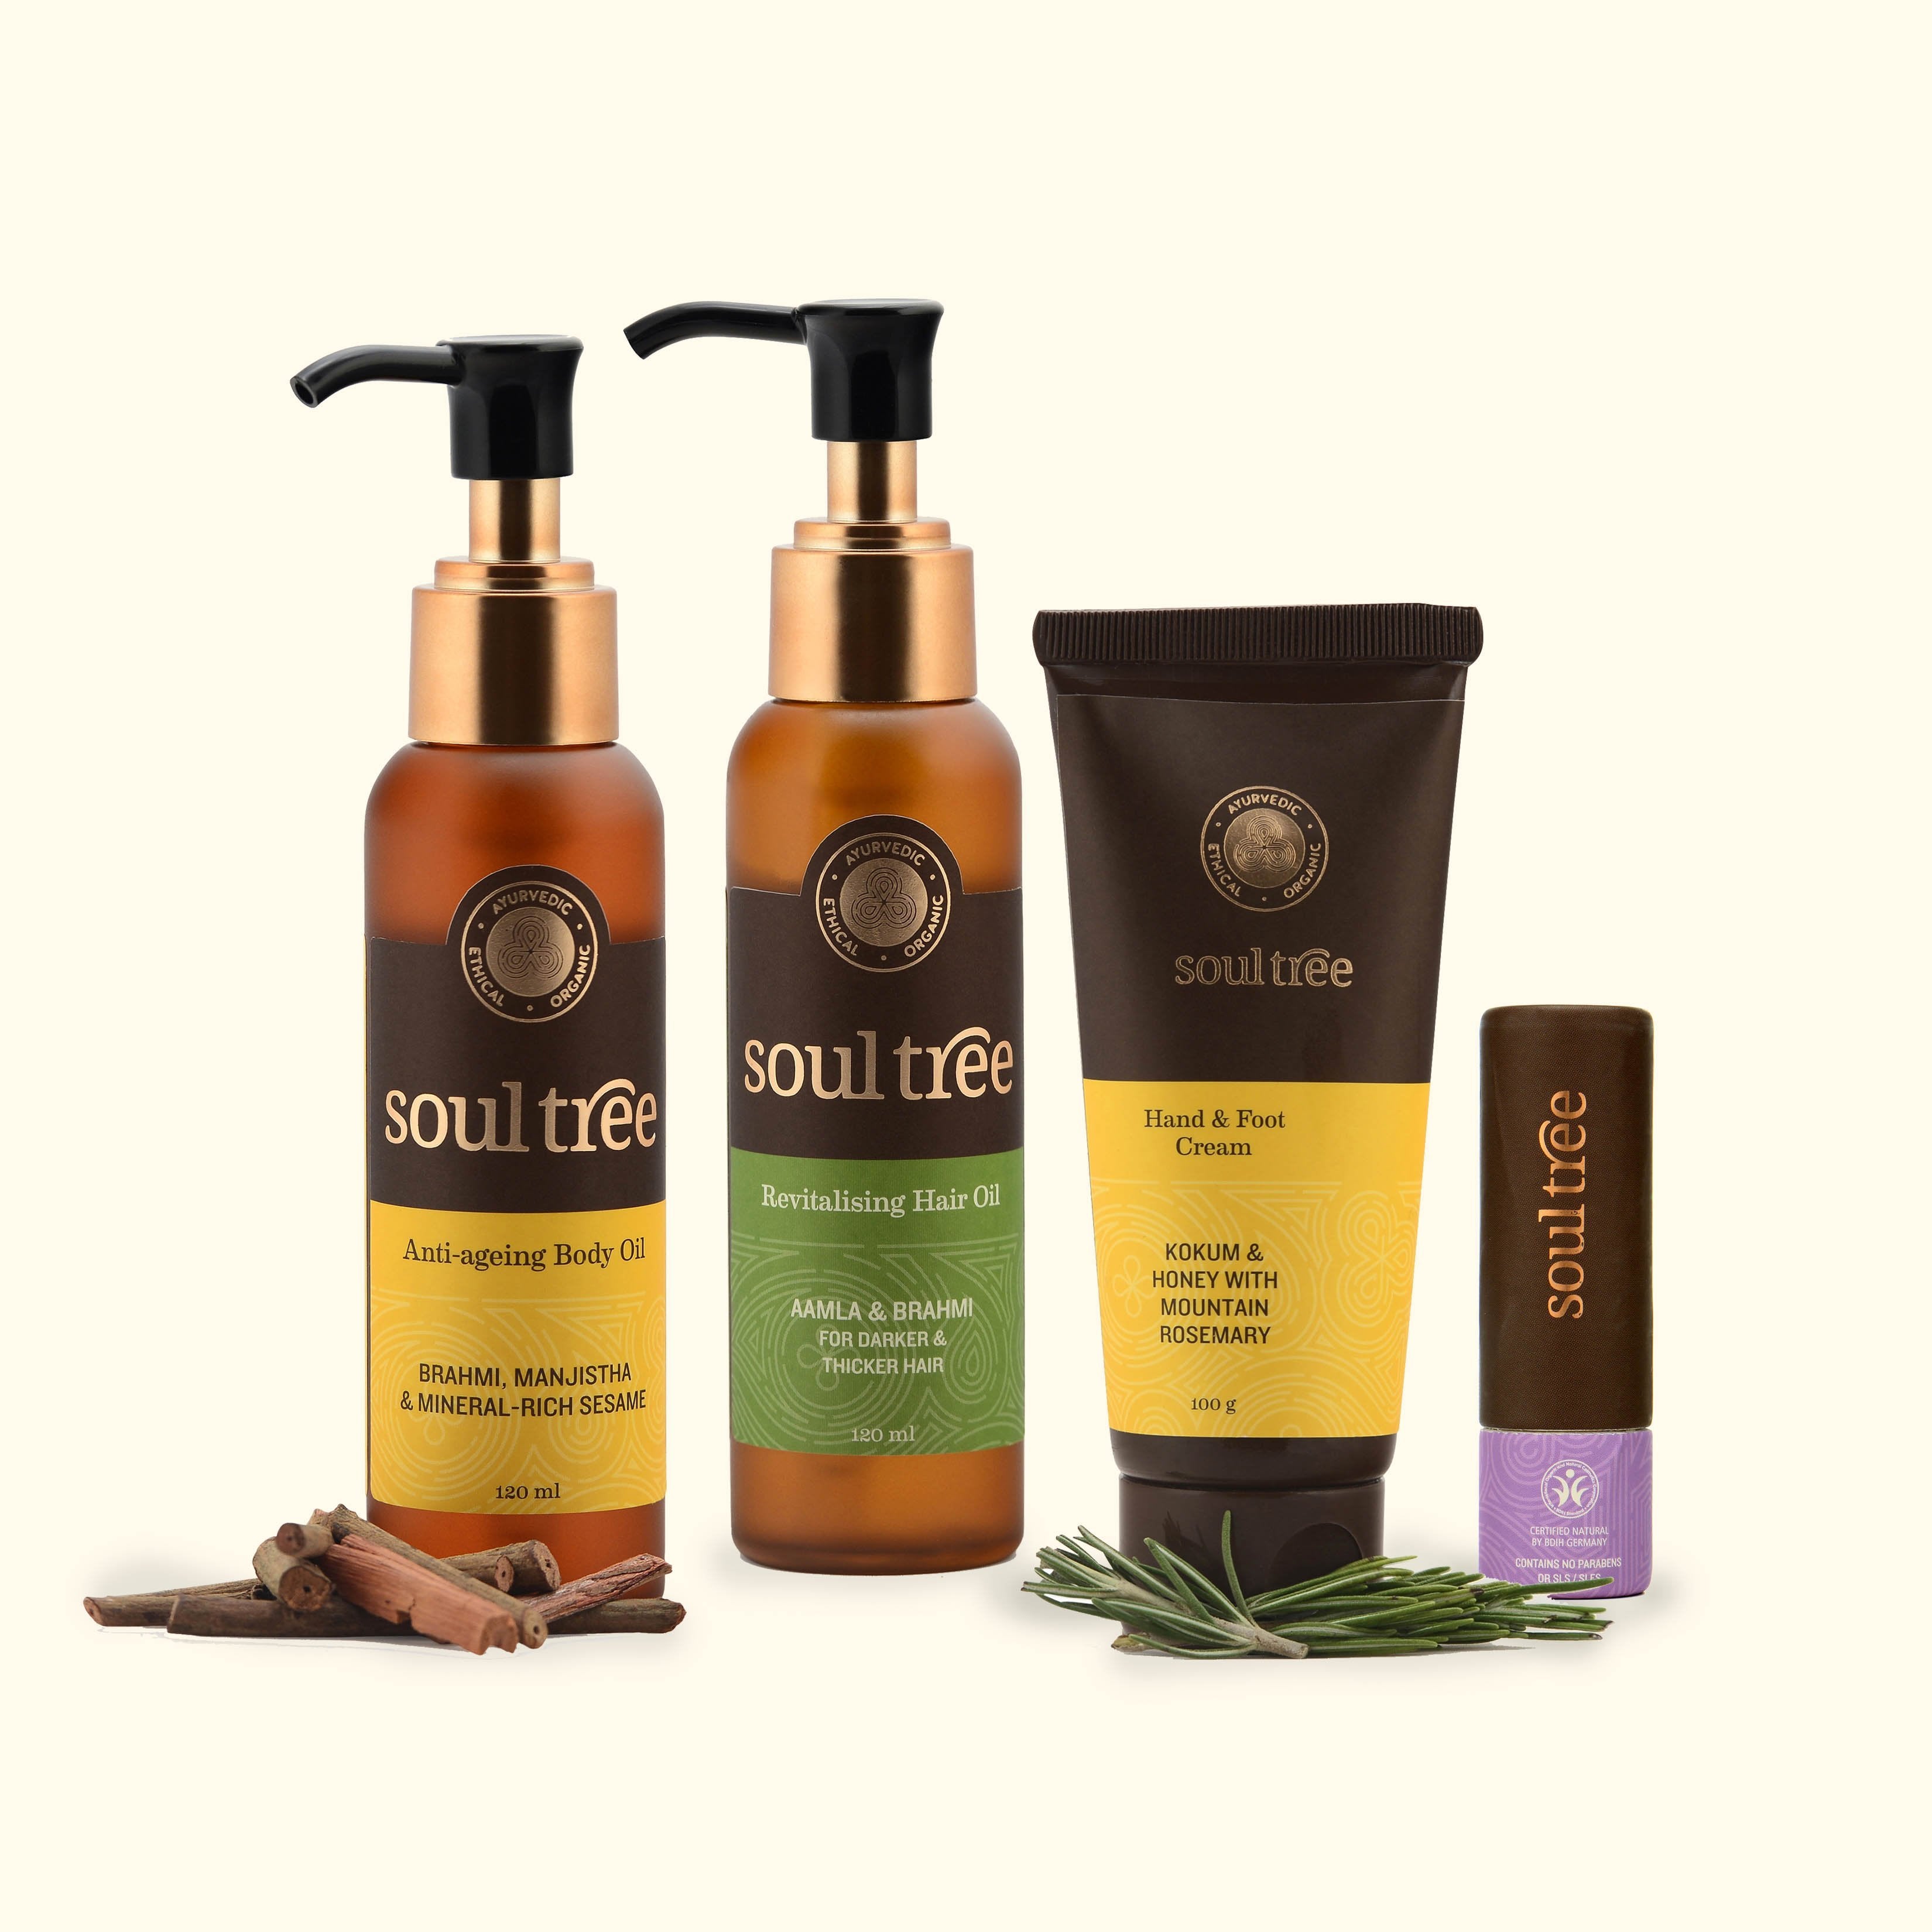 Winter Care Kit from Head to Toe - SoulTree